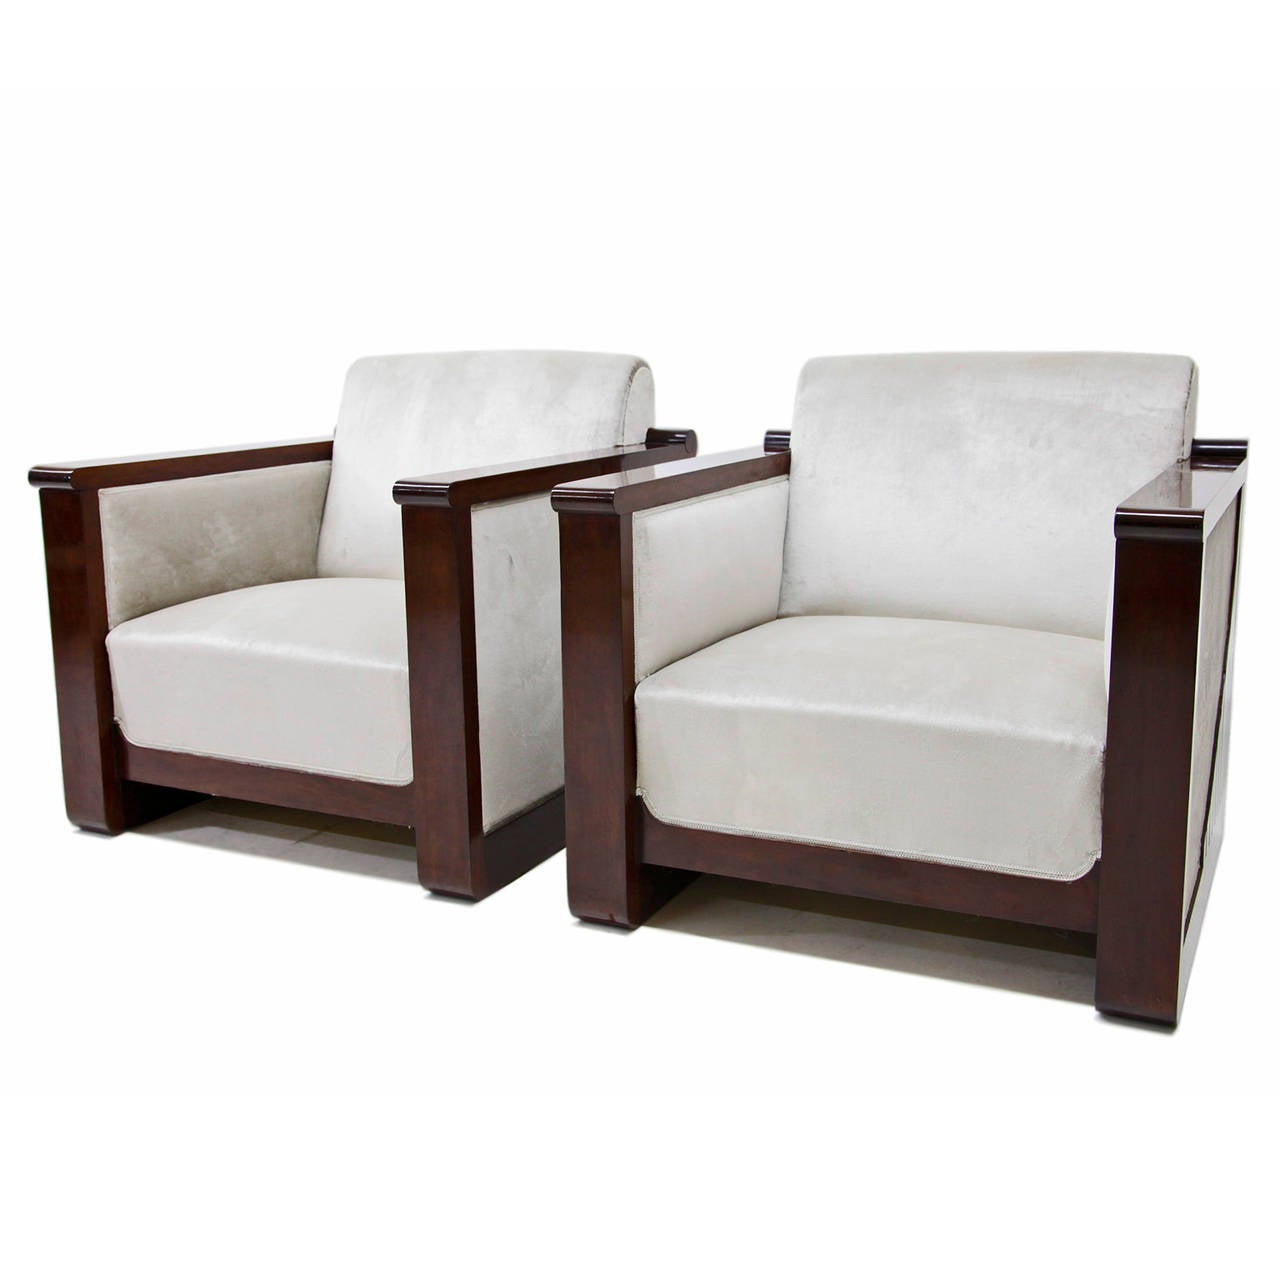 A wonderful pair of French Art Deco Armchairs, dating from the 1920s.
   